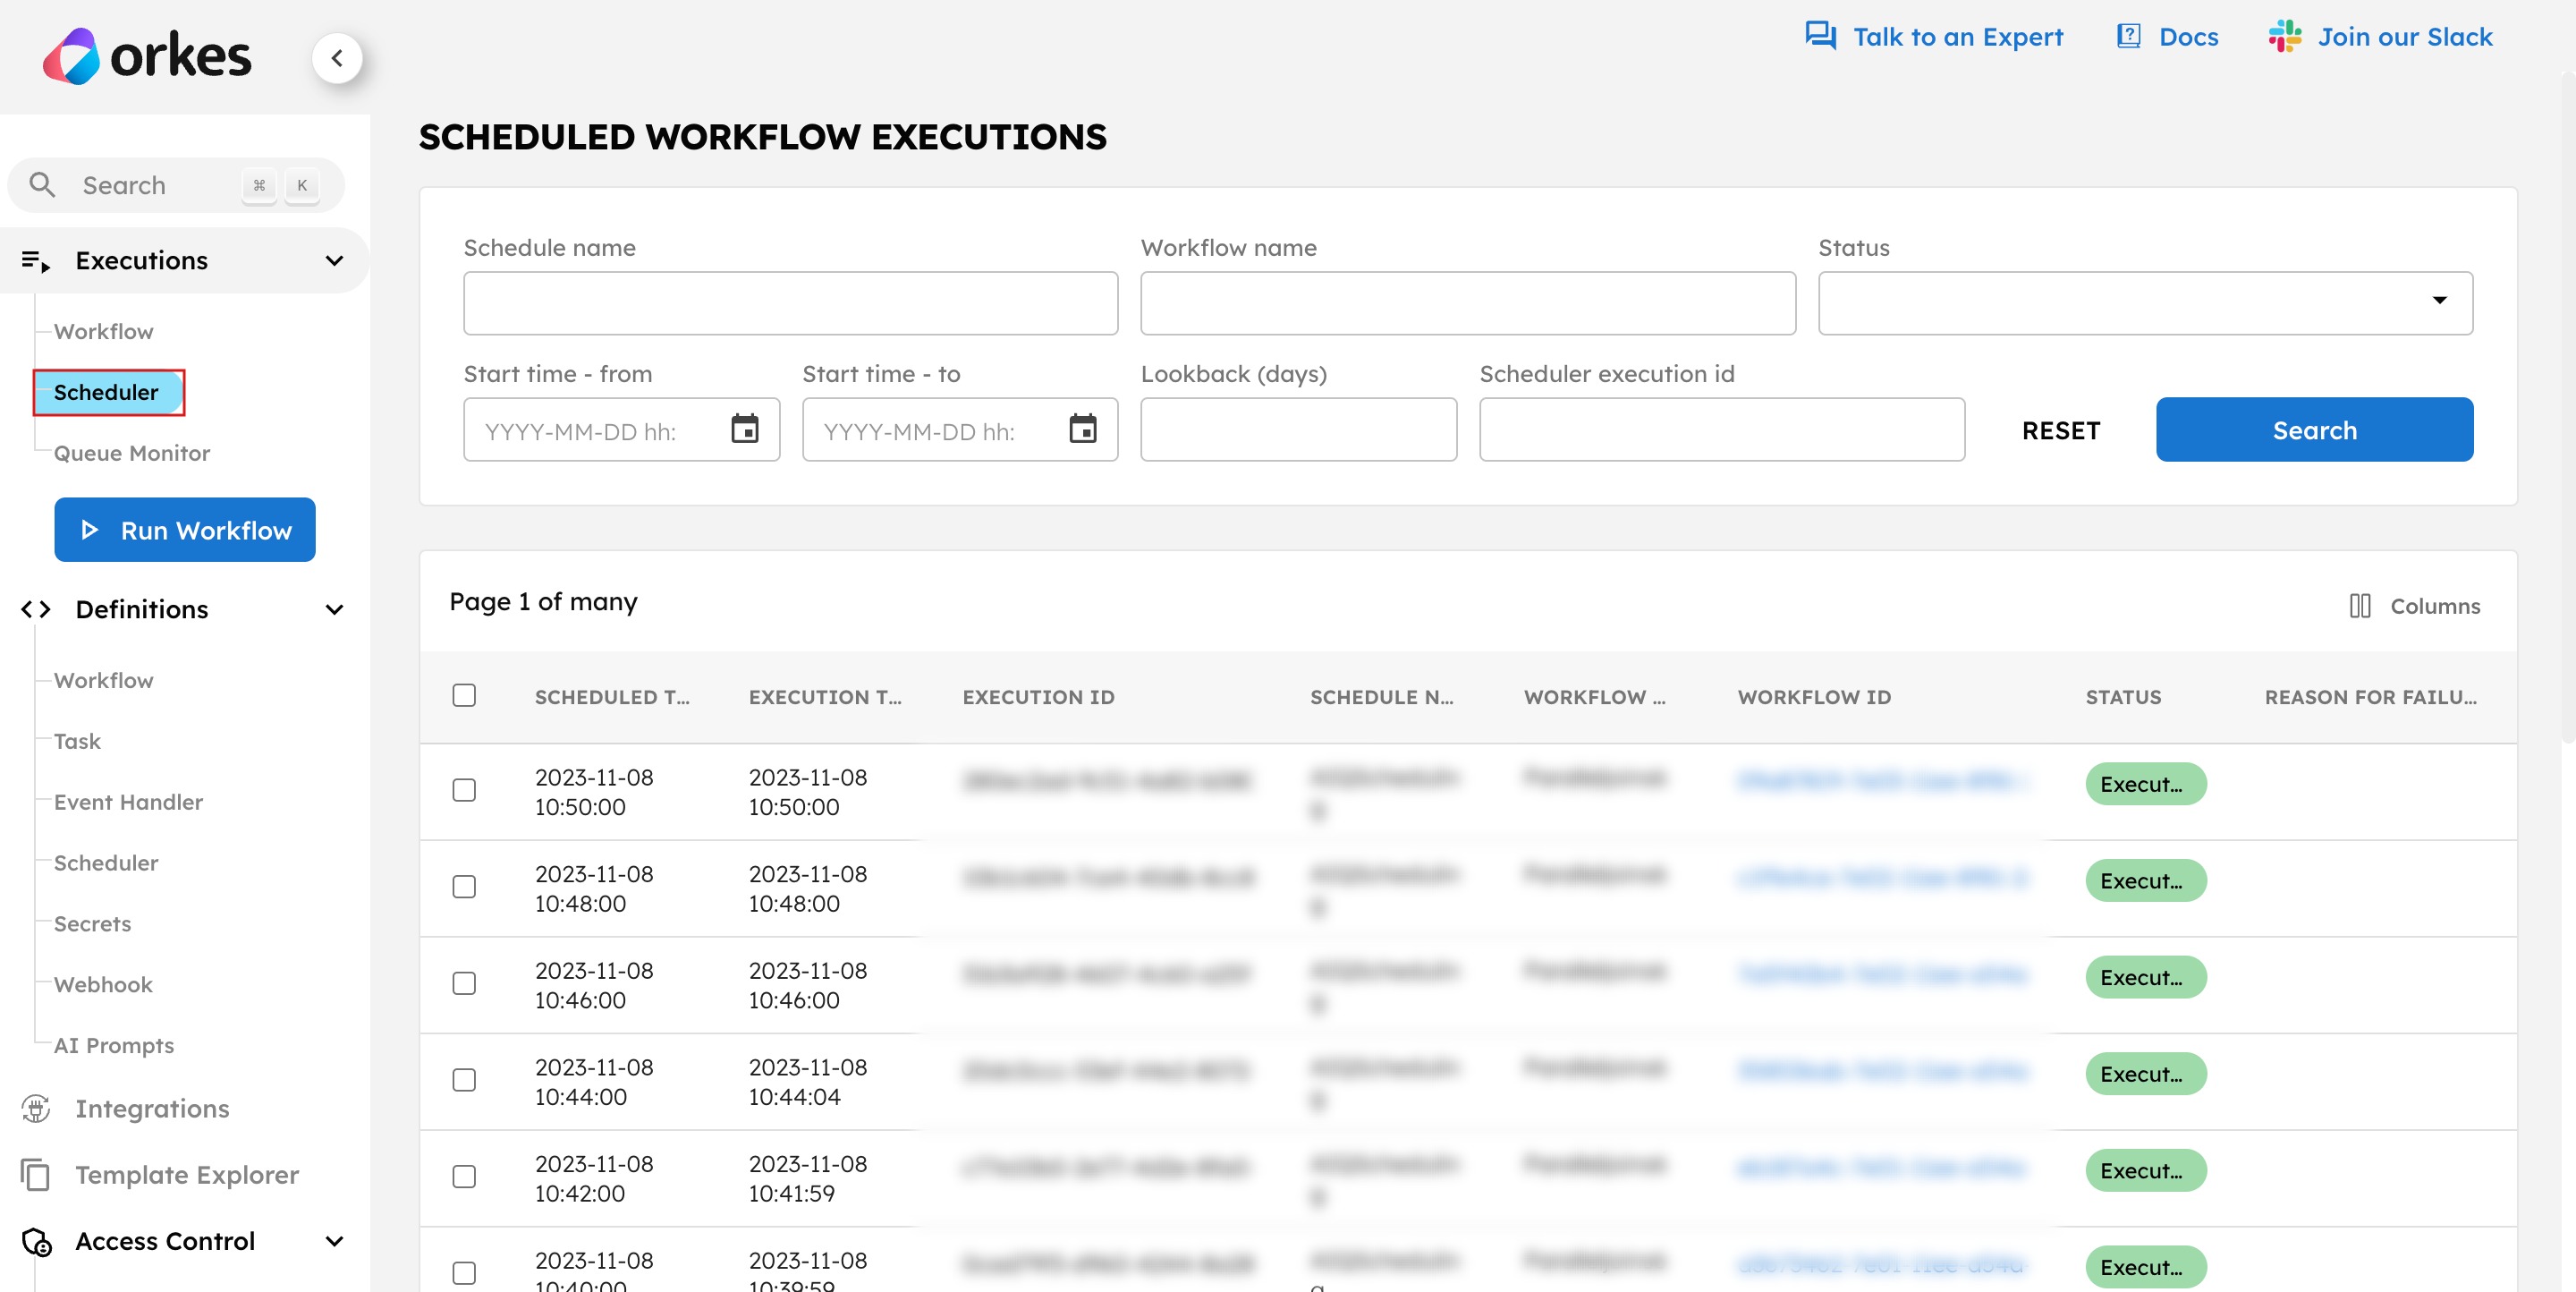 Scheduler Executions View